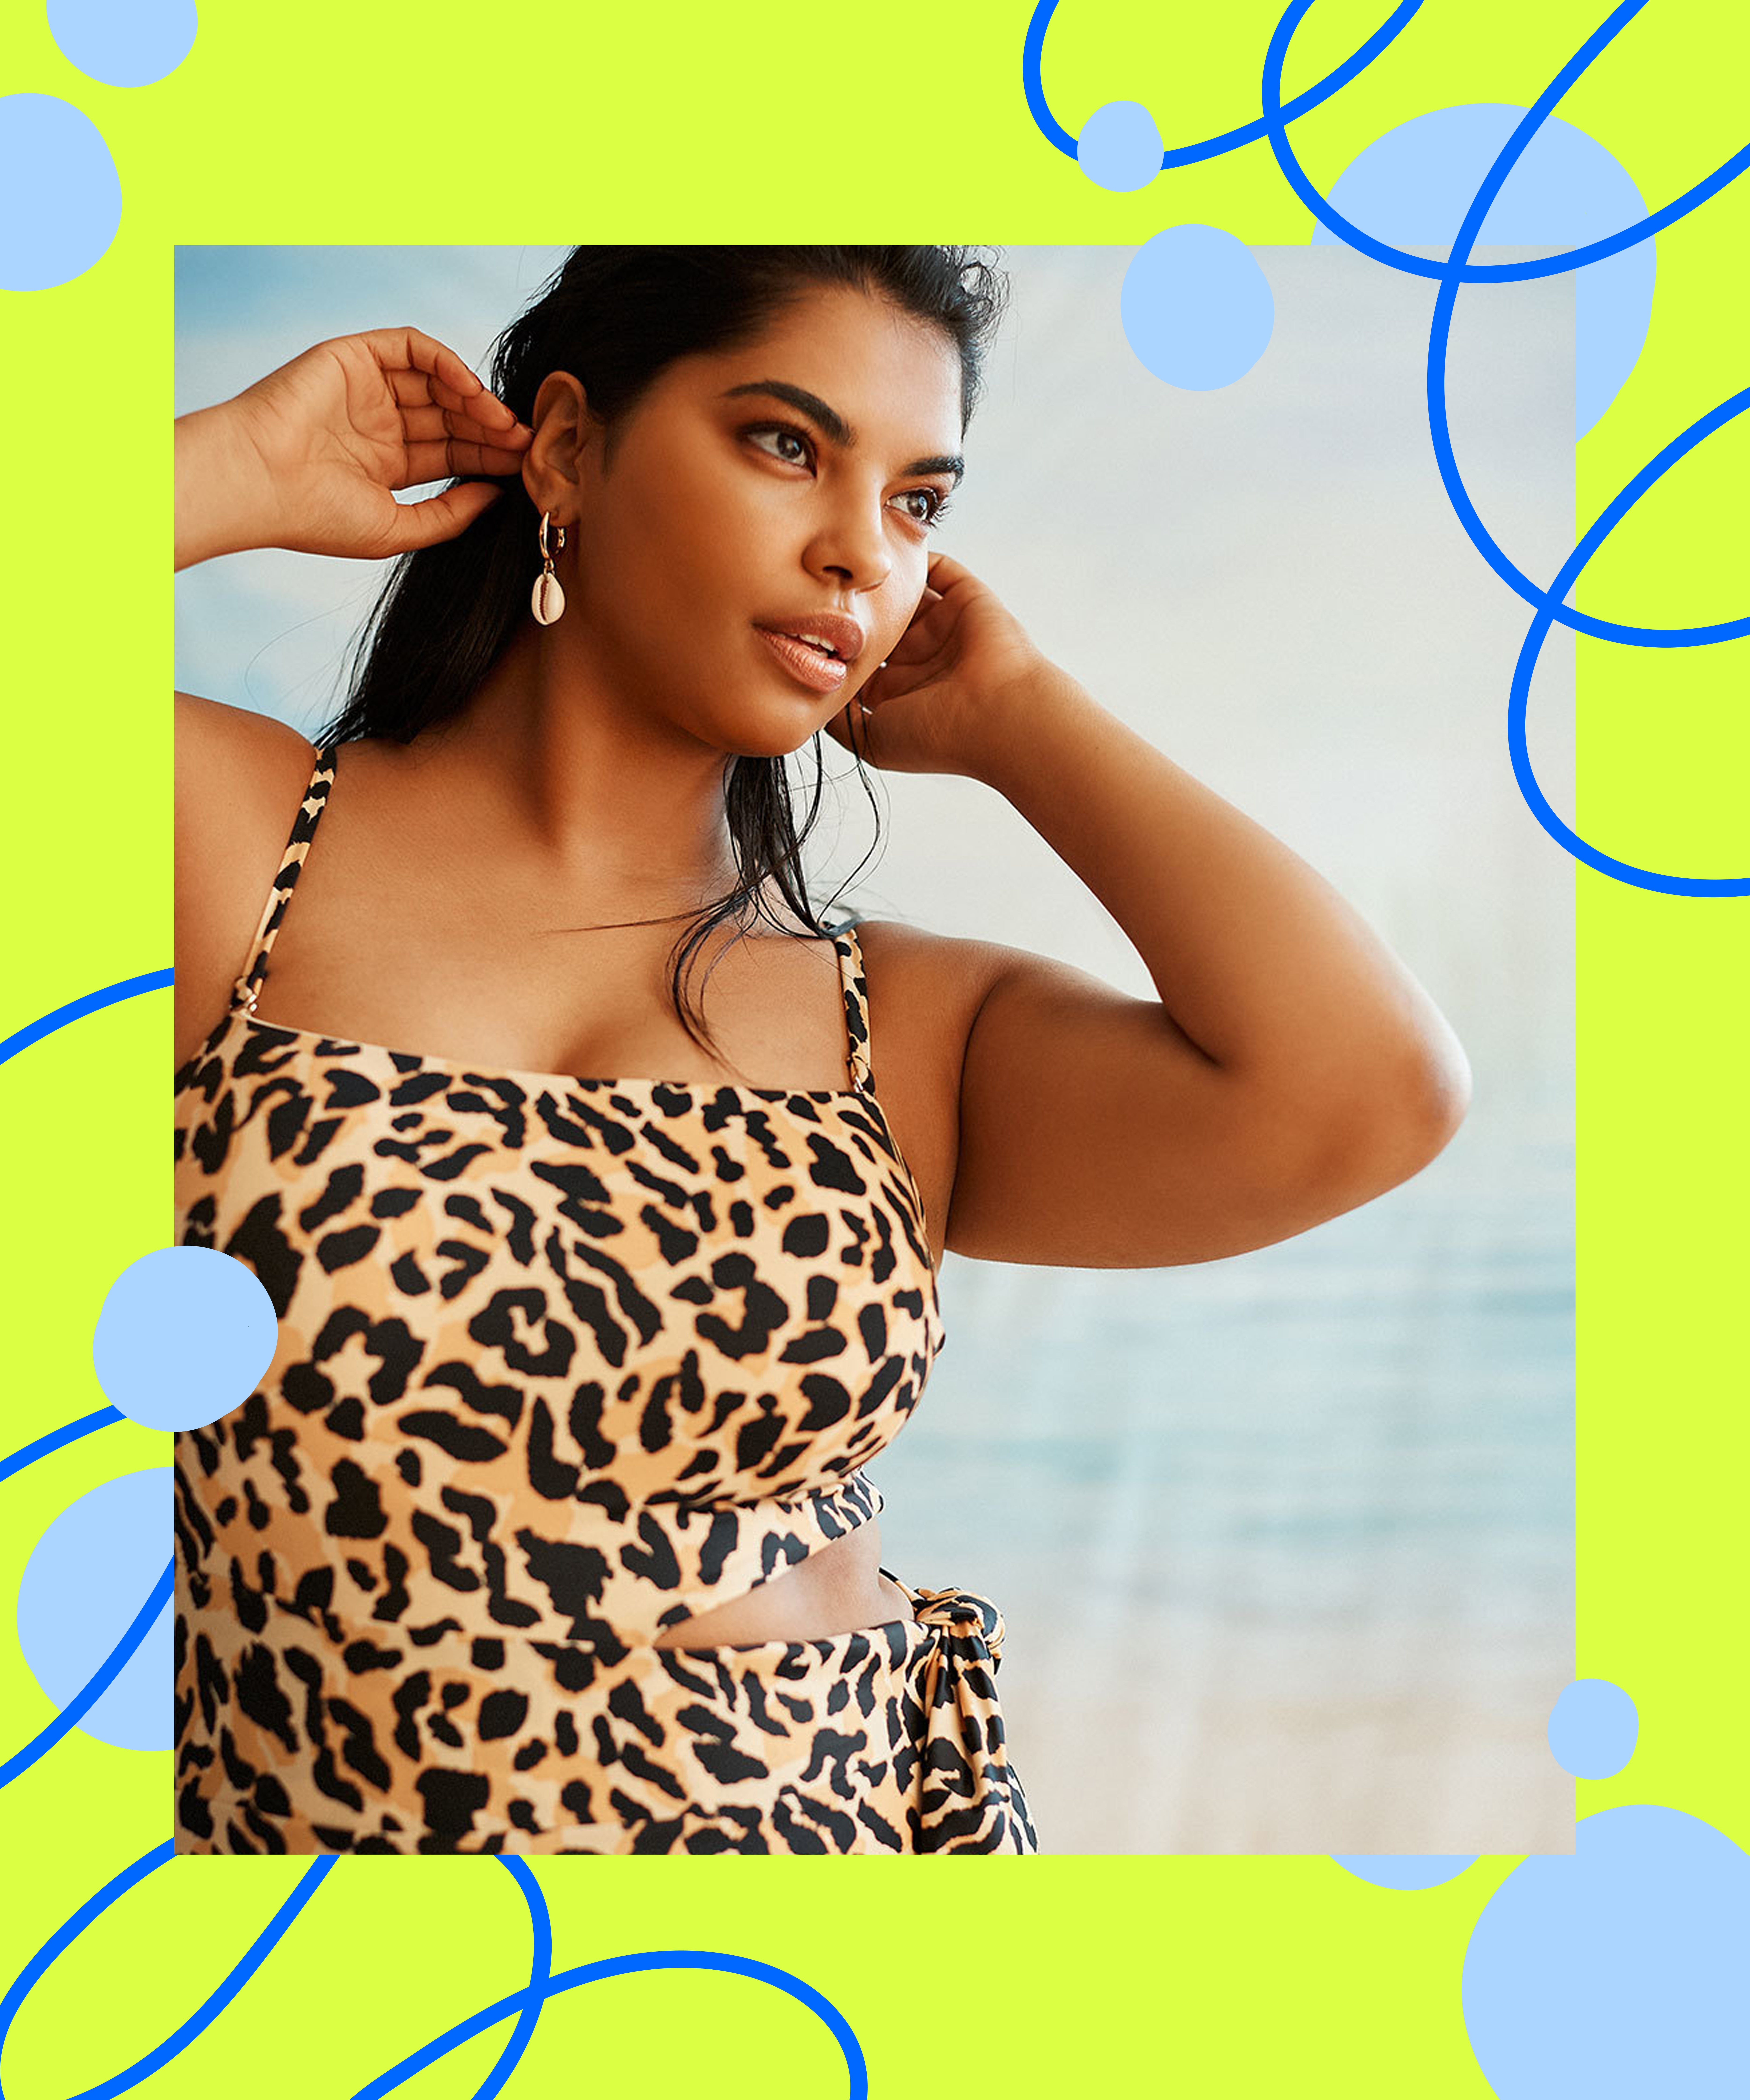 The Plus Size Swimwear Brands And